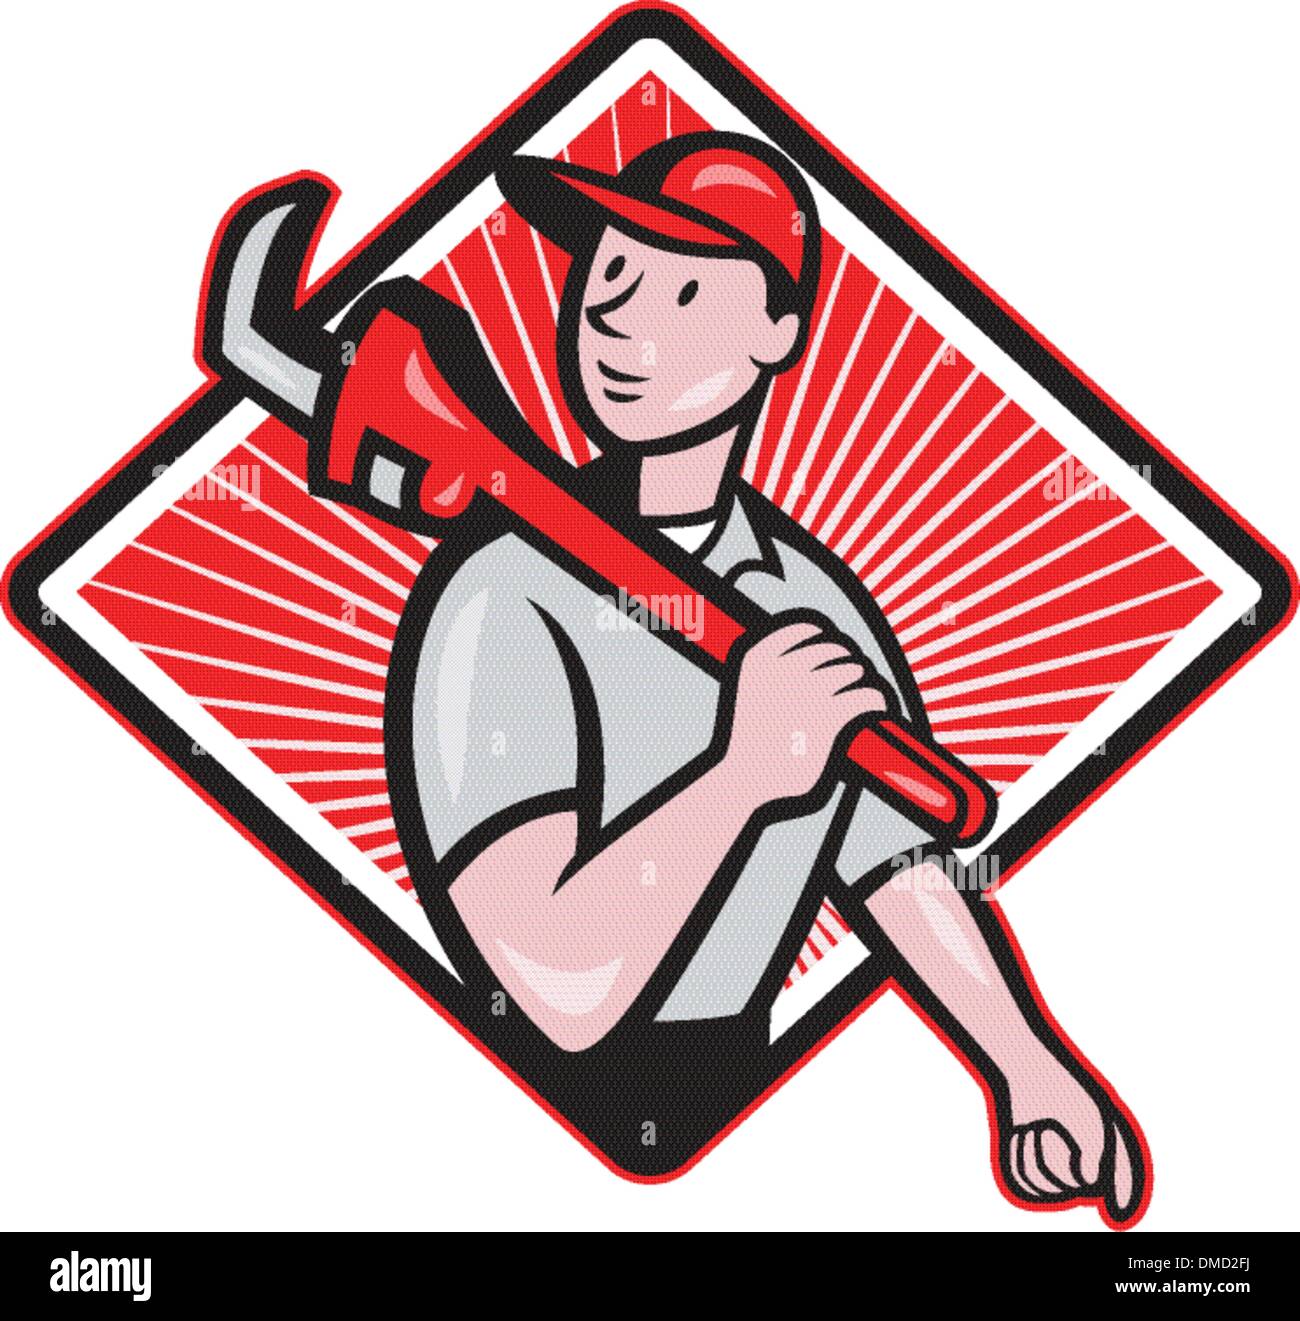 Plumber With Monkey Wrench Cartoon Stock Vector